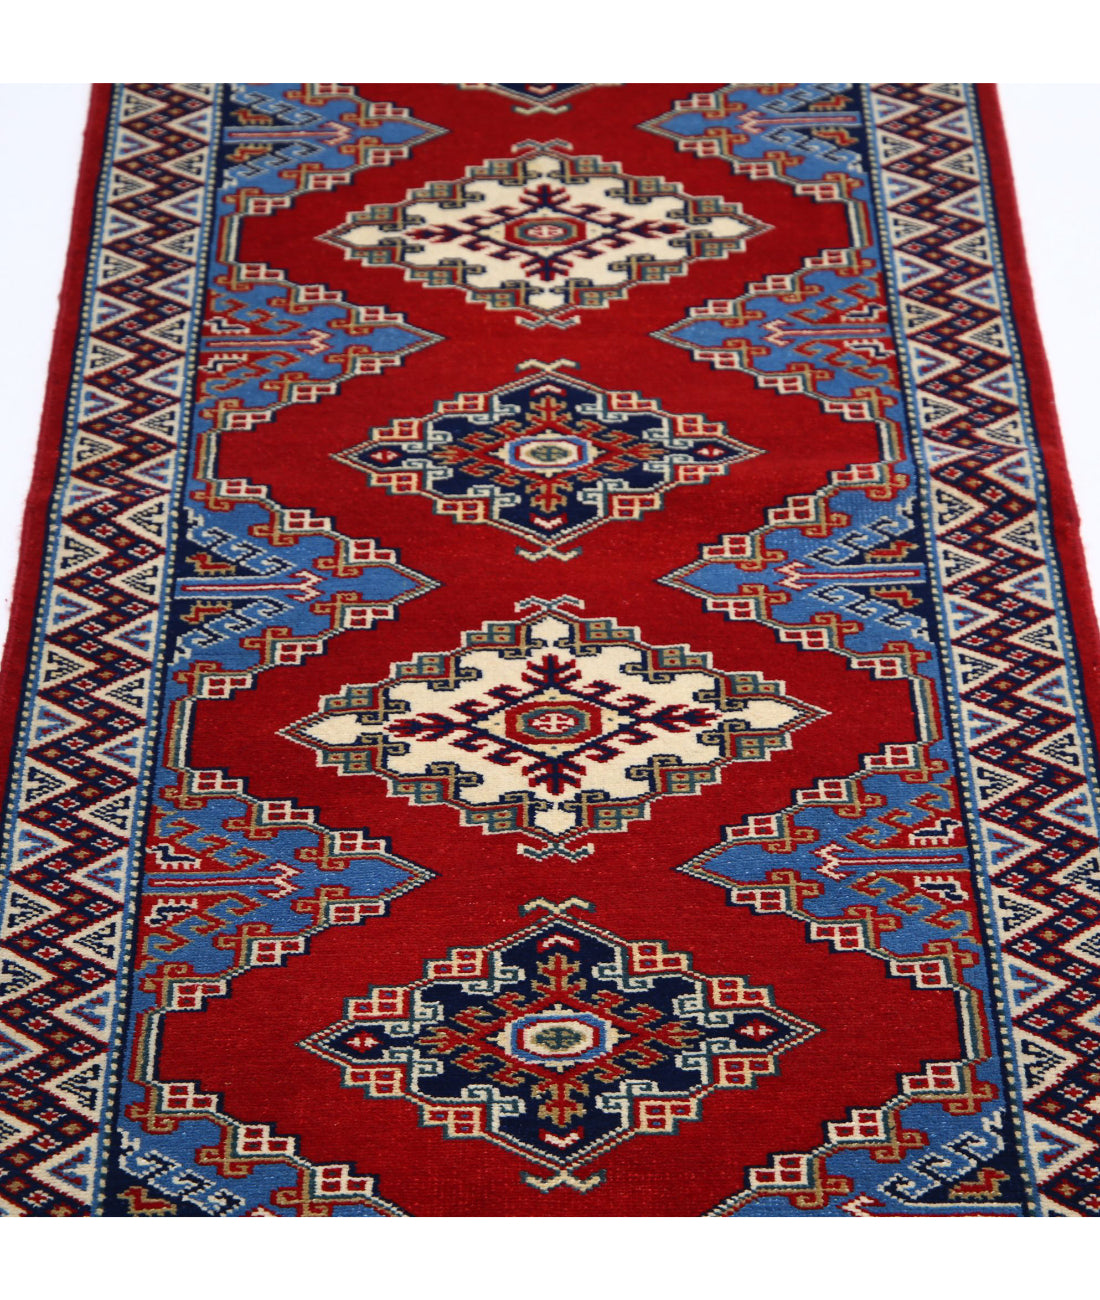 Shirvan 2'1'' X 5'11'' Hand-Knotted Wool Rug 2'1'' x 5'11'' (63 X 178) / Red / Blue